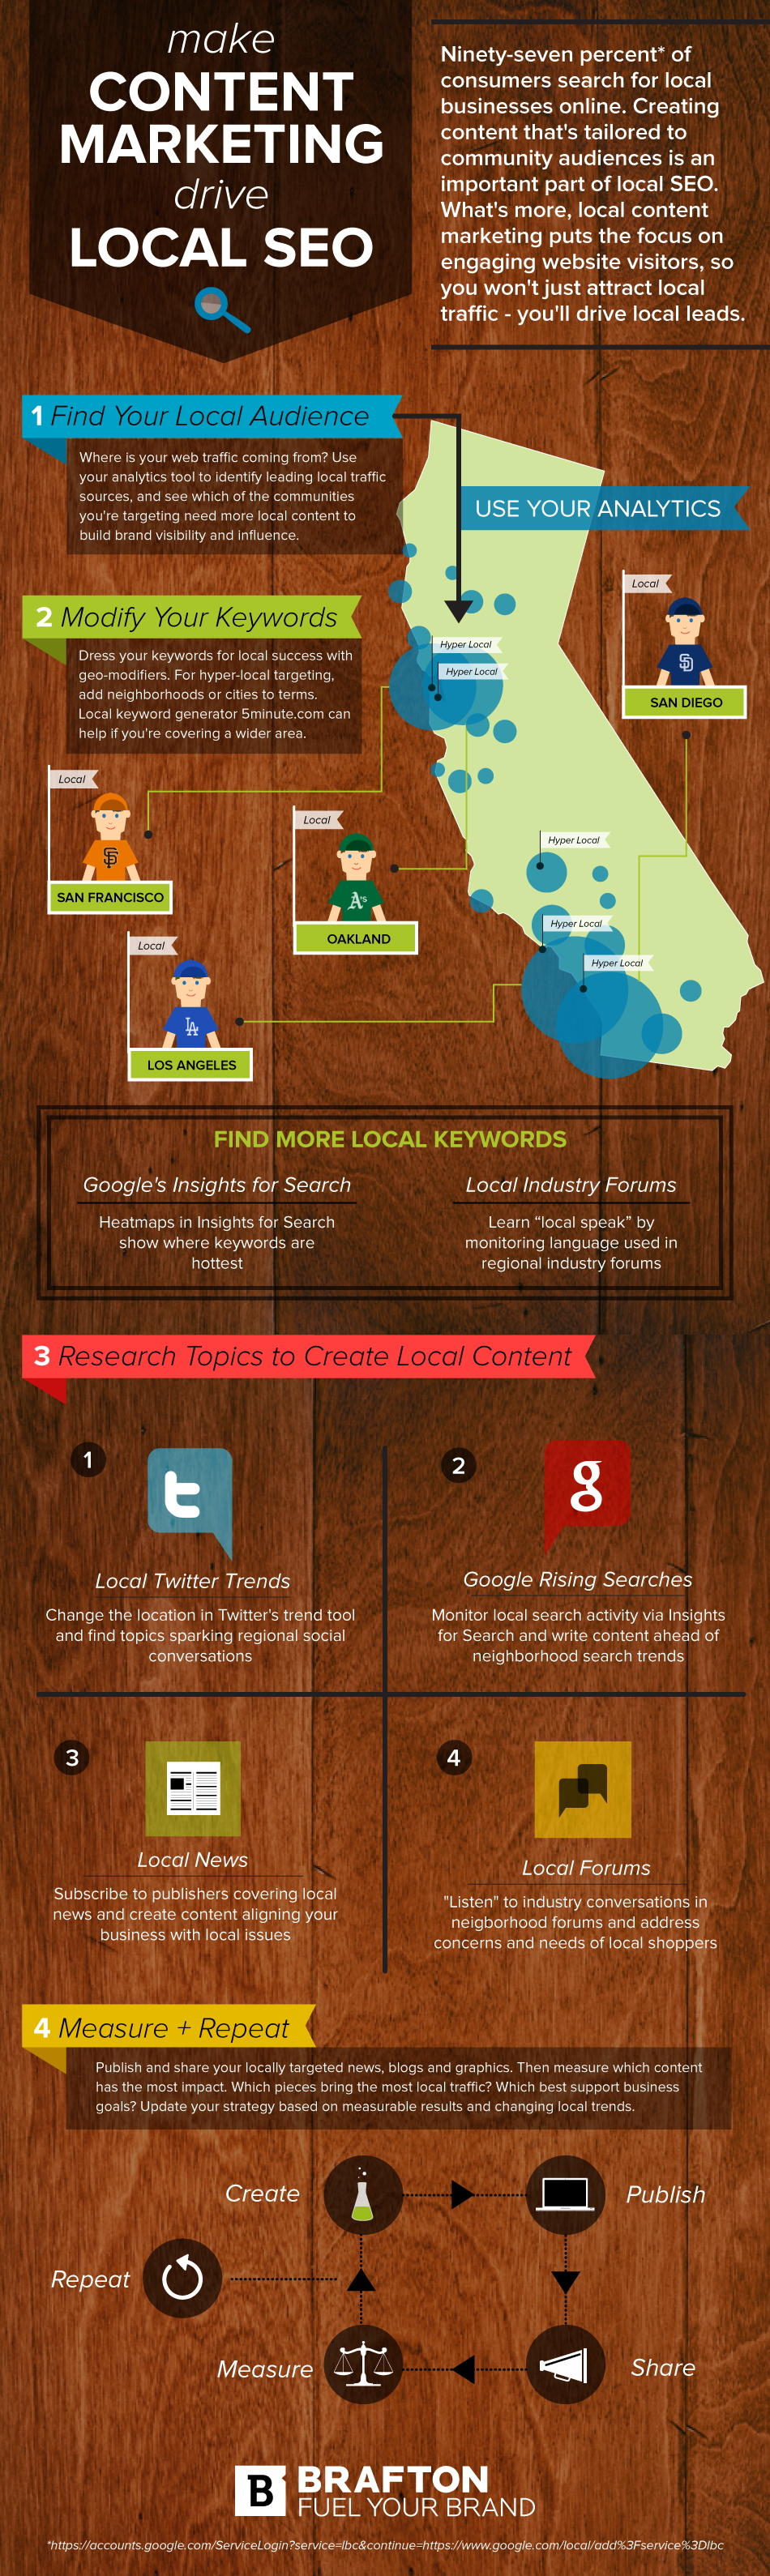 How to Make Content Marketing Drive Local SEO